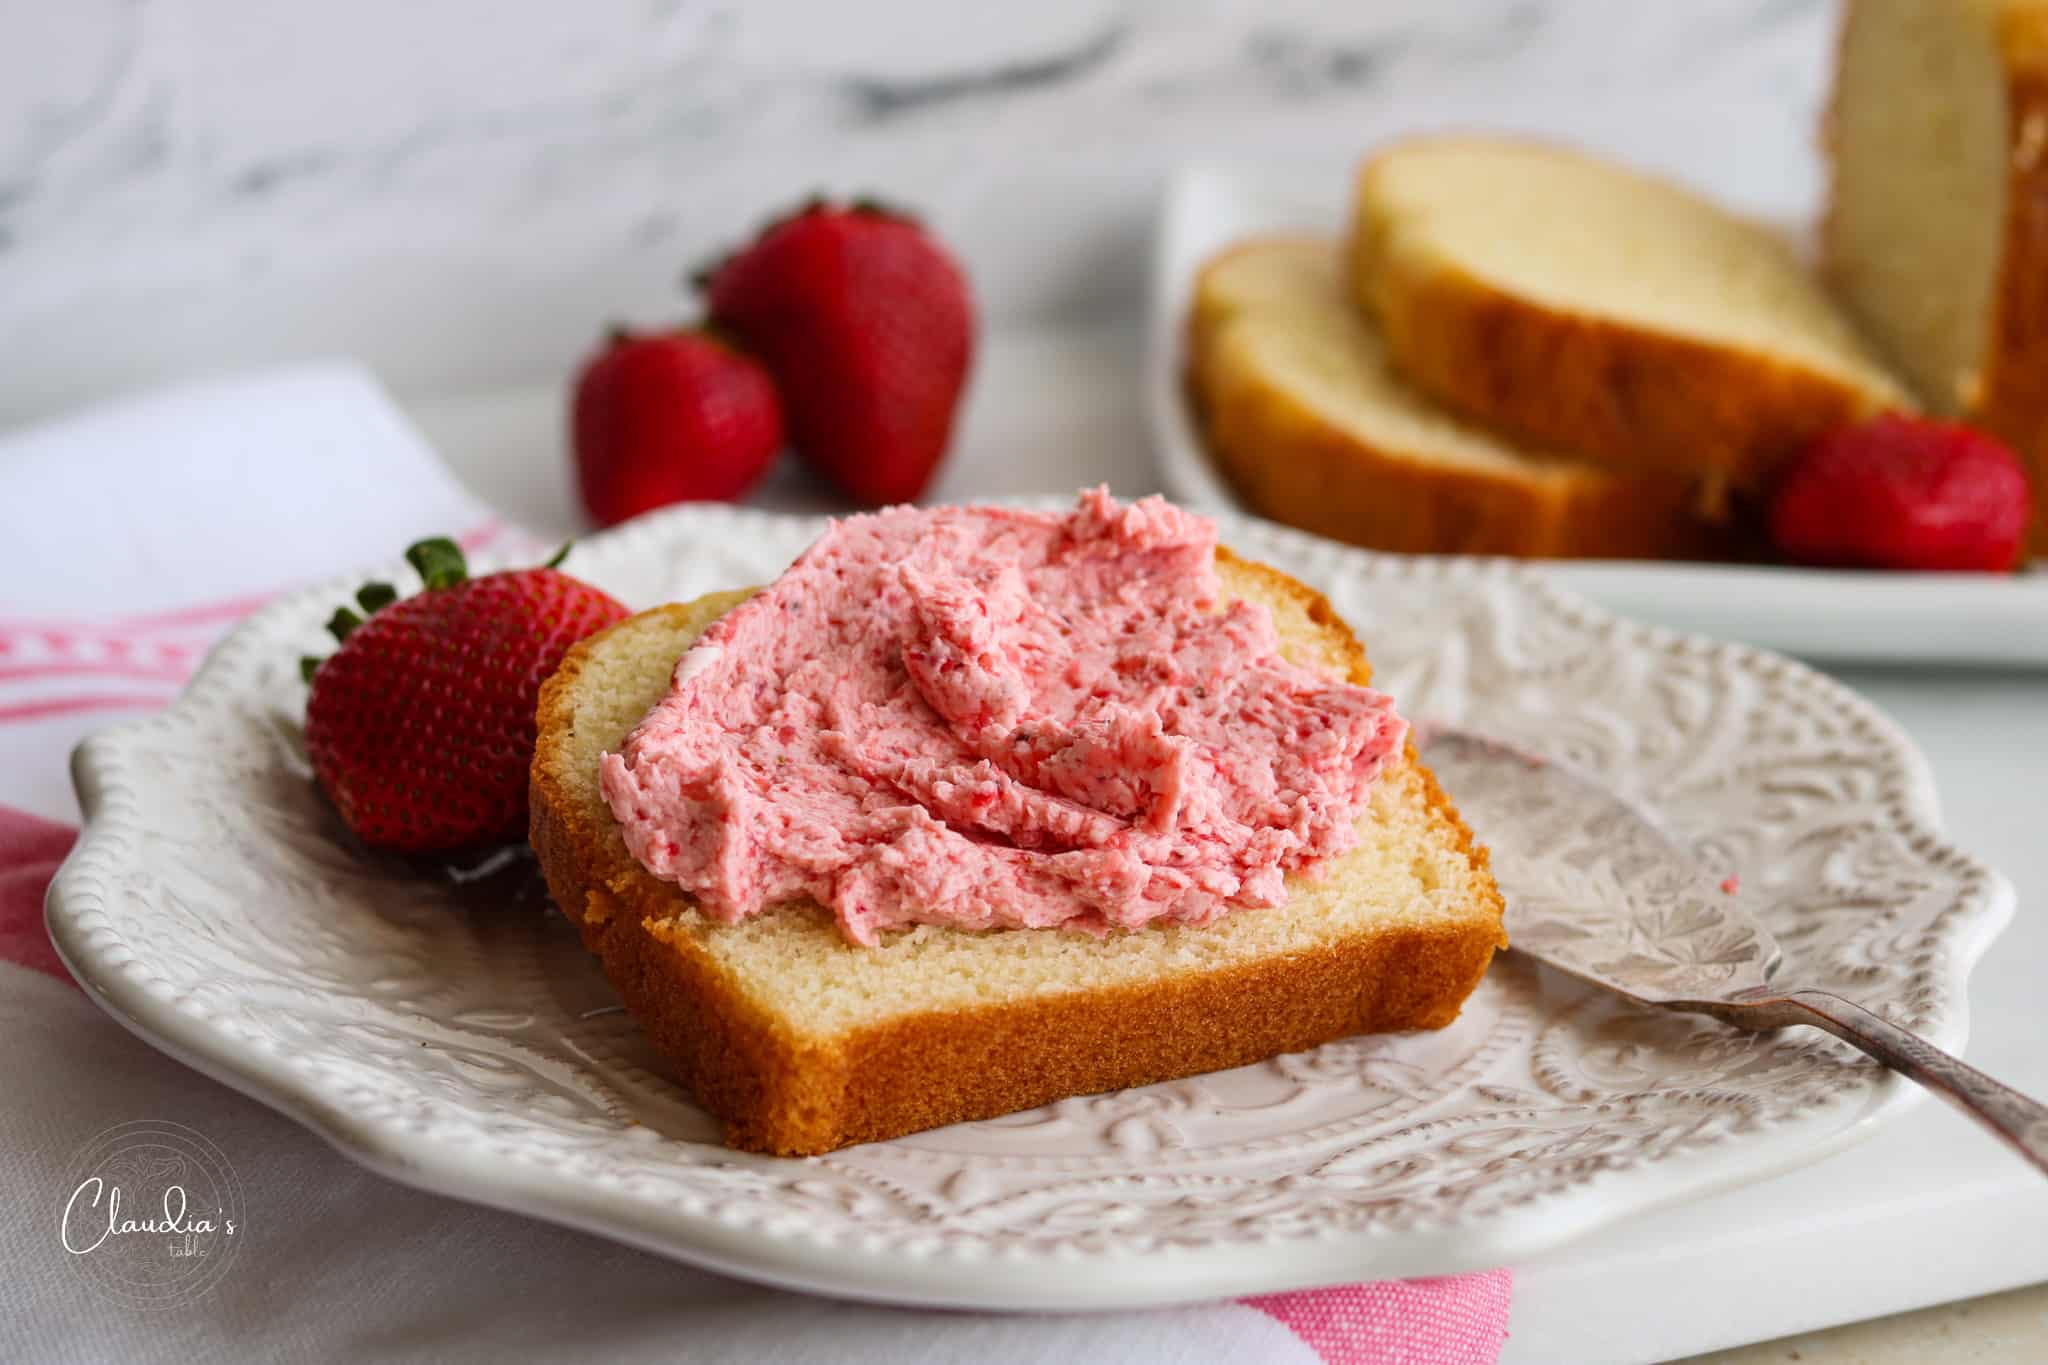 Roasted Strawberry Compound Butter